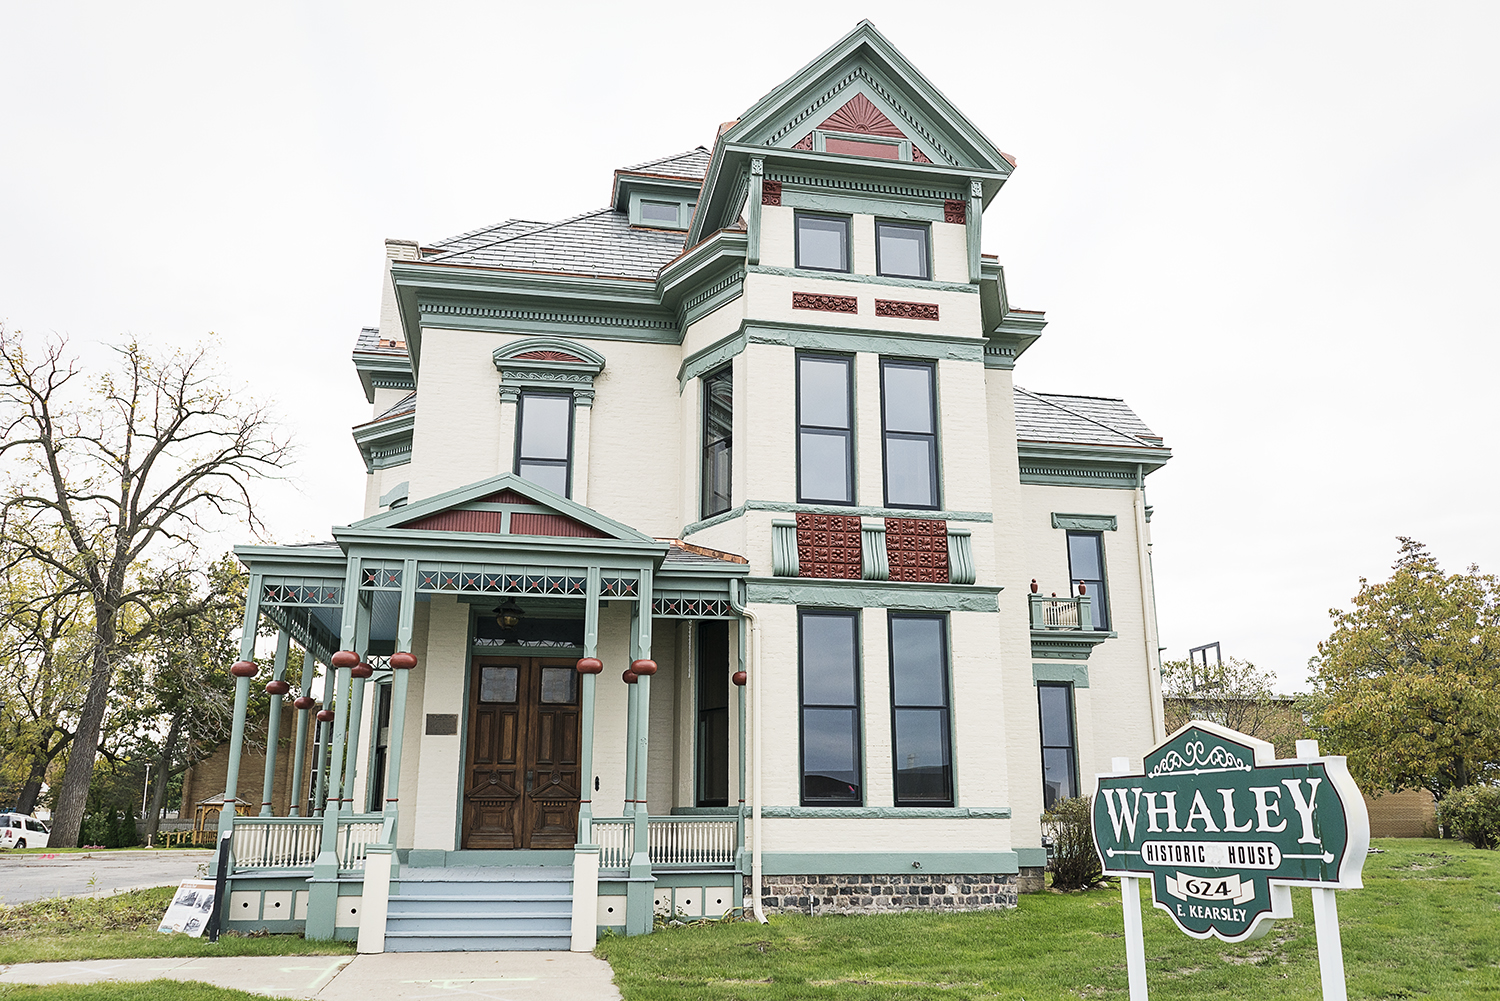 Flint, MI - Tuesday, October 31, 2017: The Whaley Historic House Museum sits on Kearsley Street, along I-475, on a fraction of the land it was originally built on. Kearsley Street was home to many of the influential families of Flint including the Do